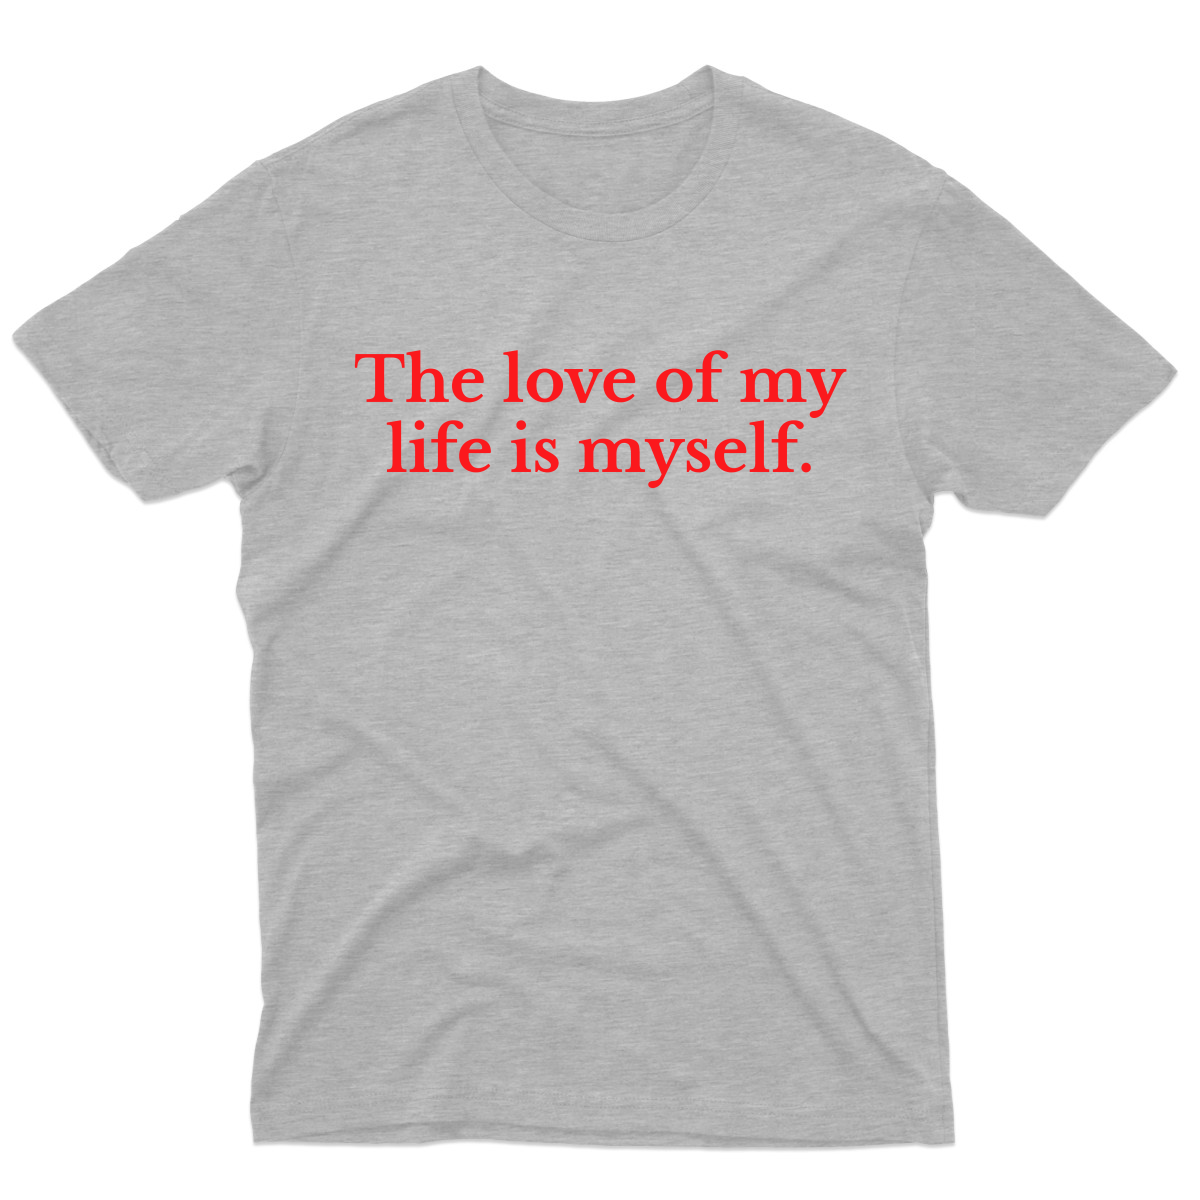 The love of my life is myself Men's T-shirt | Gray